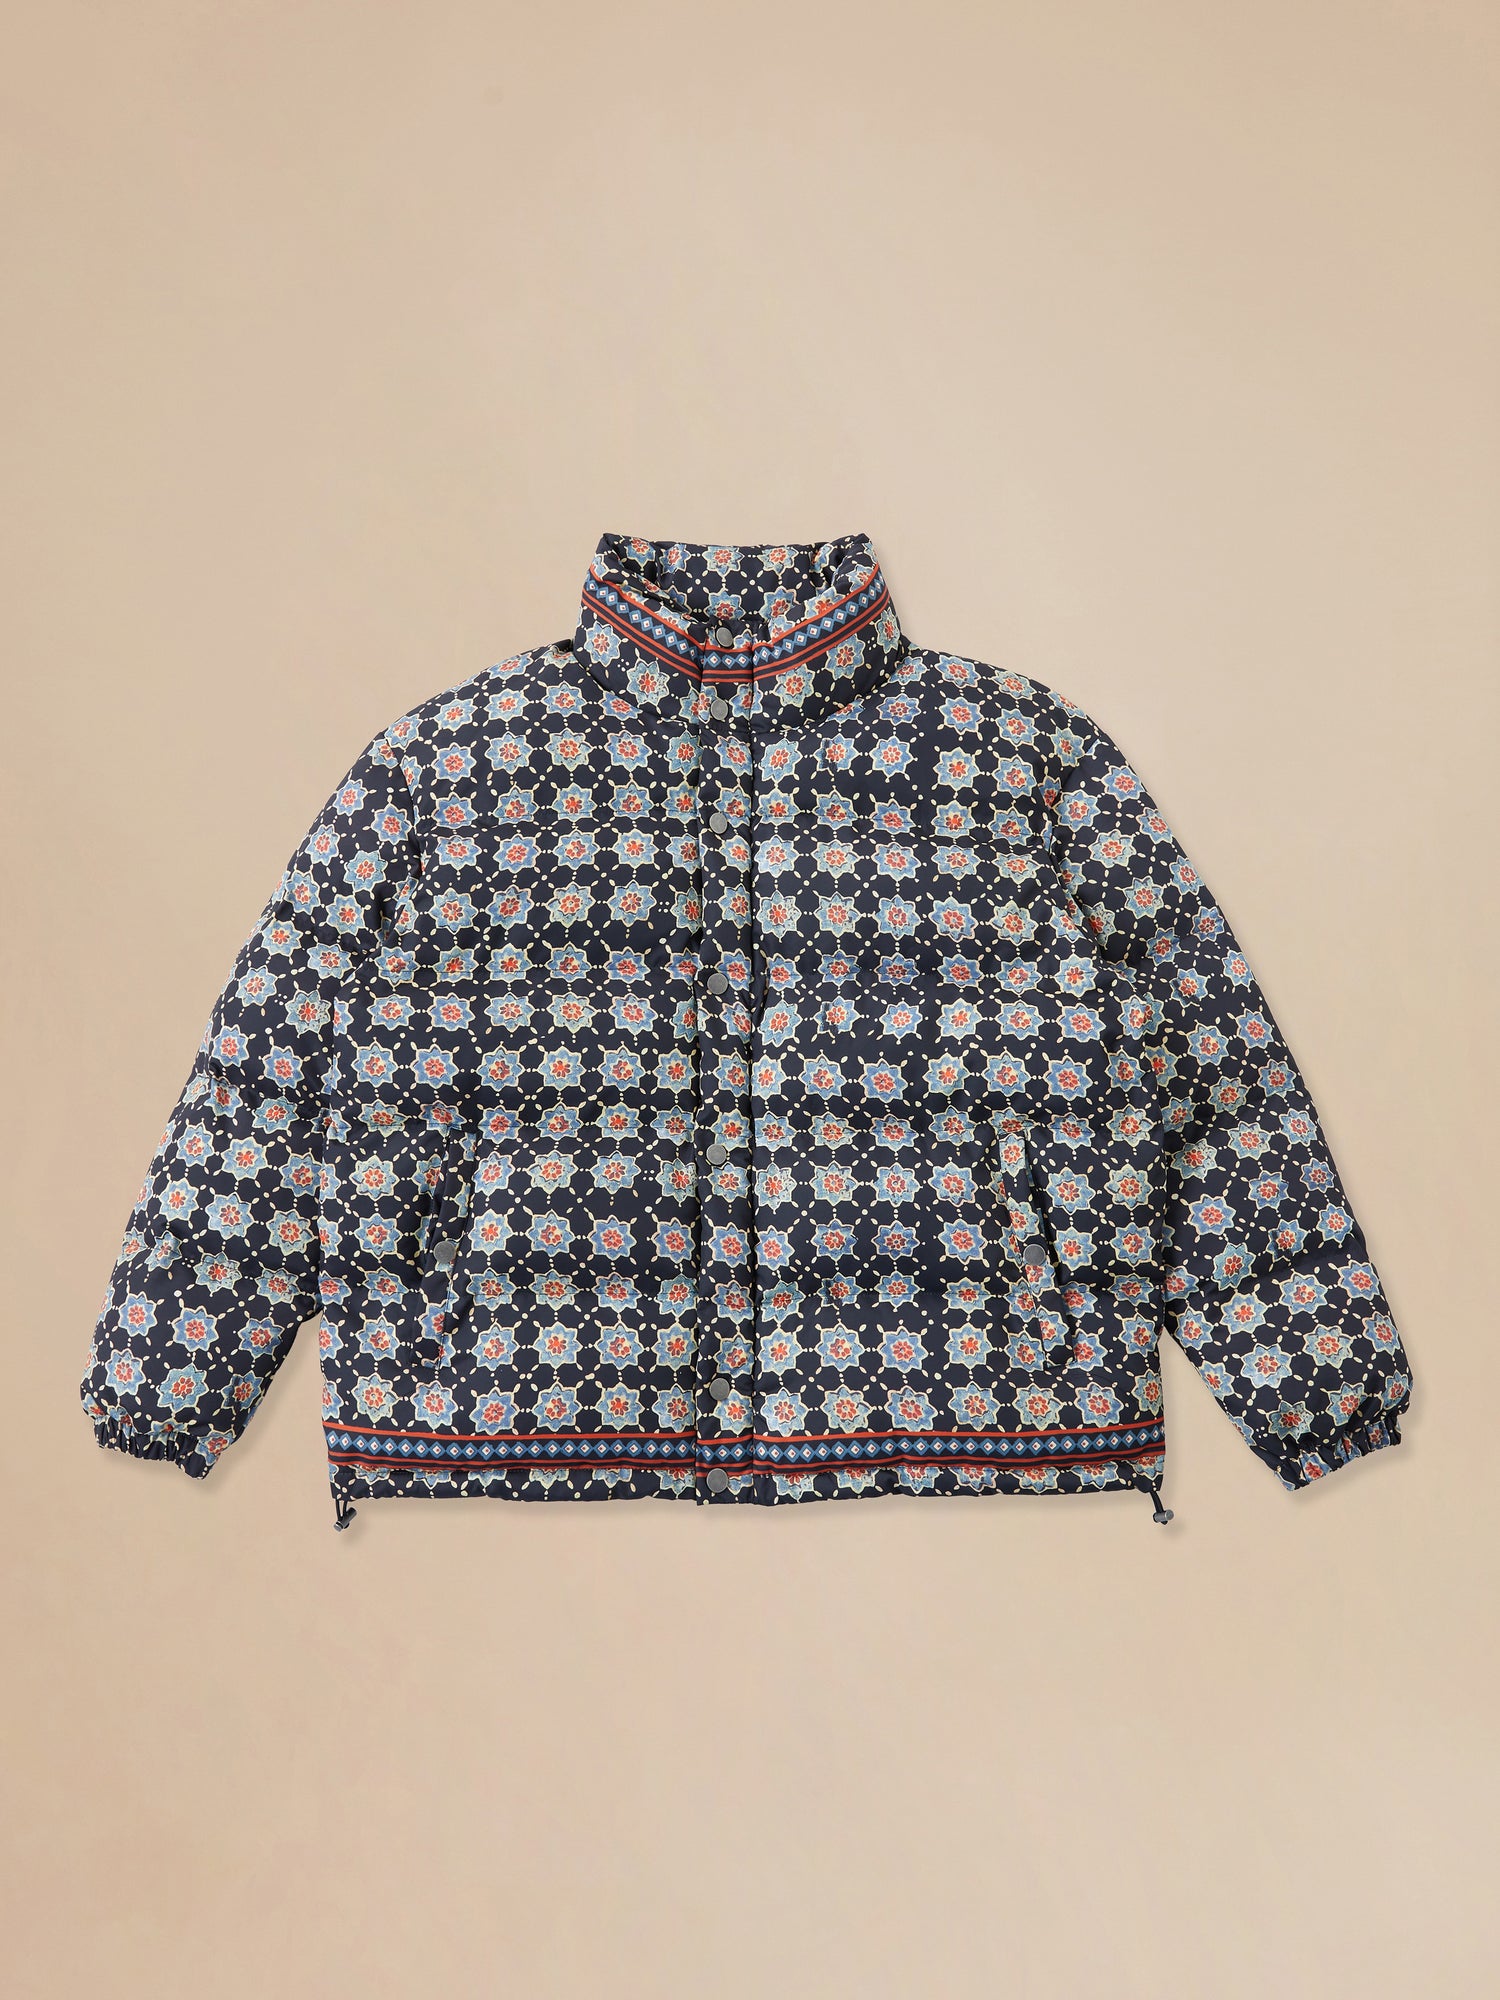 A blue and white Found Ajrak Block Puffer Jacket with a floral pattern, available as a pre-order item.